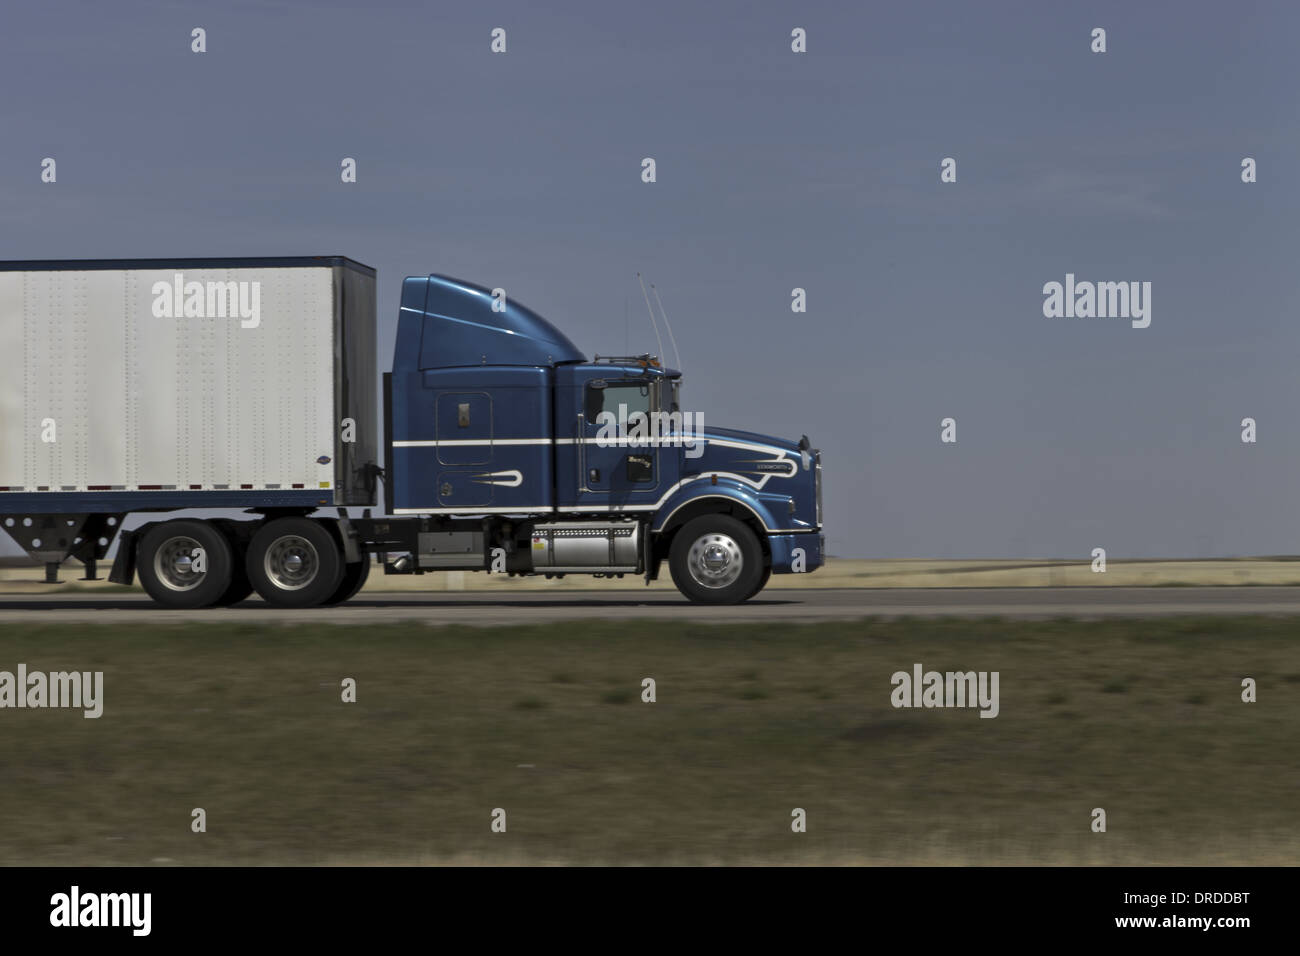 Blue Semi truck on the Highway heading left to right with motion blur of background, white box van trailer Stock Photo